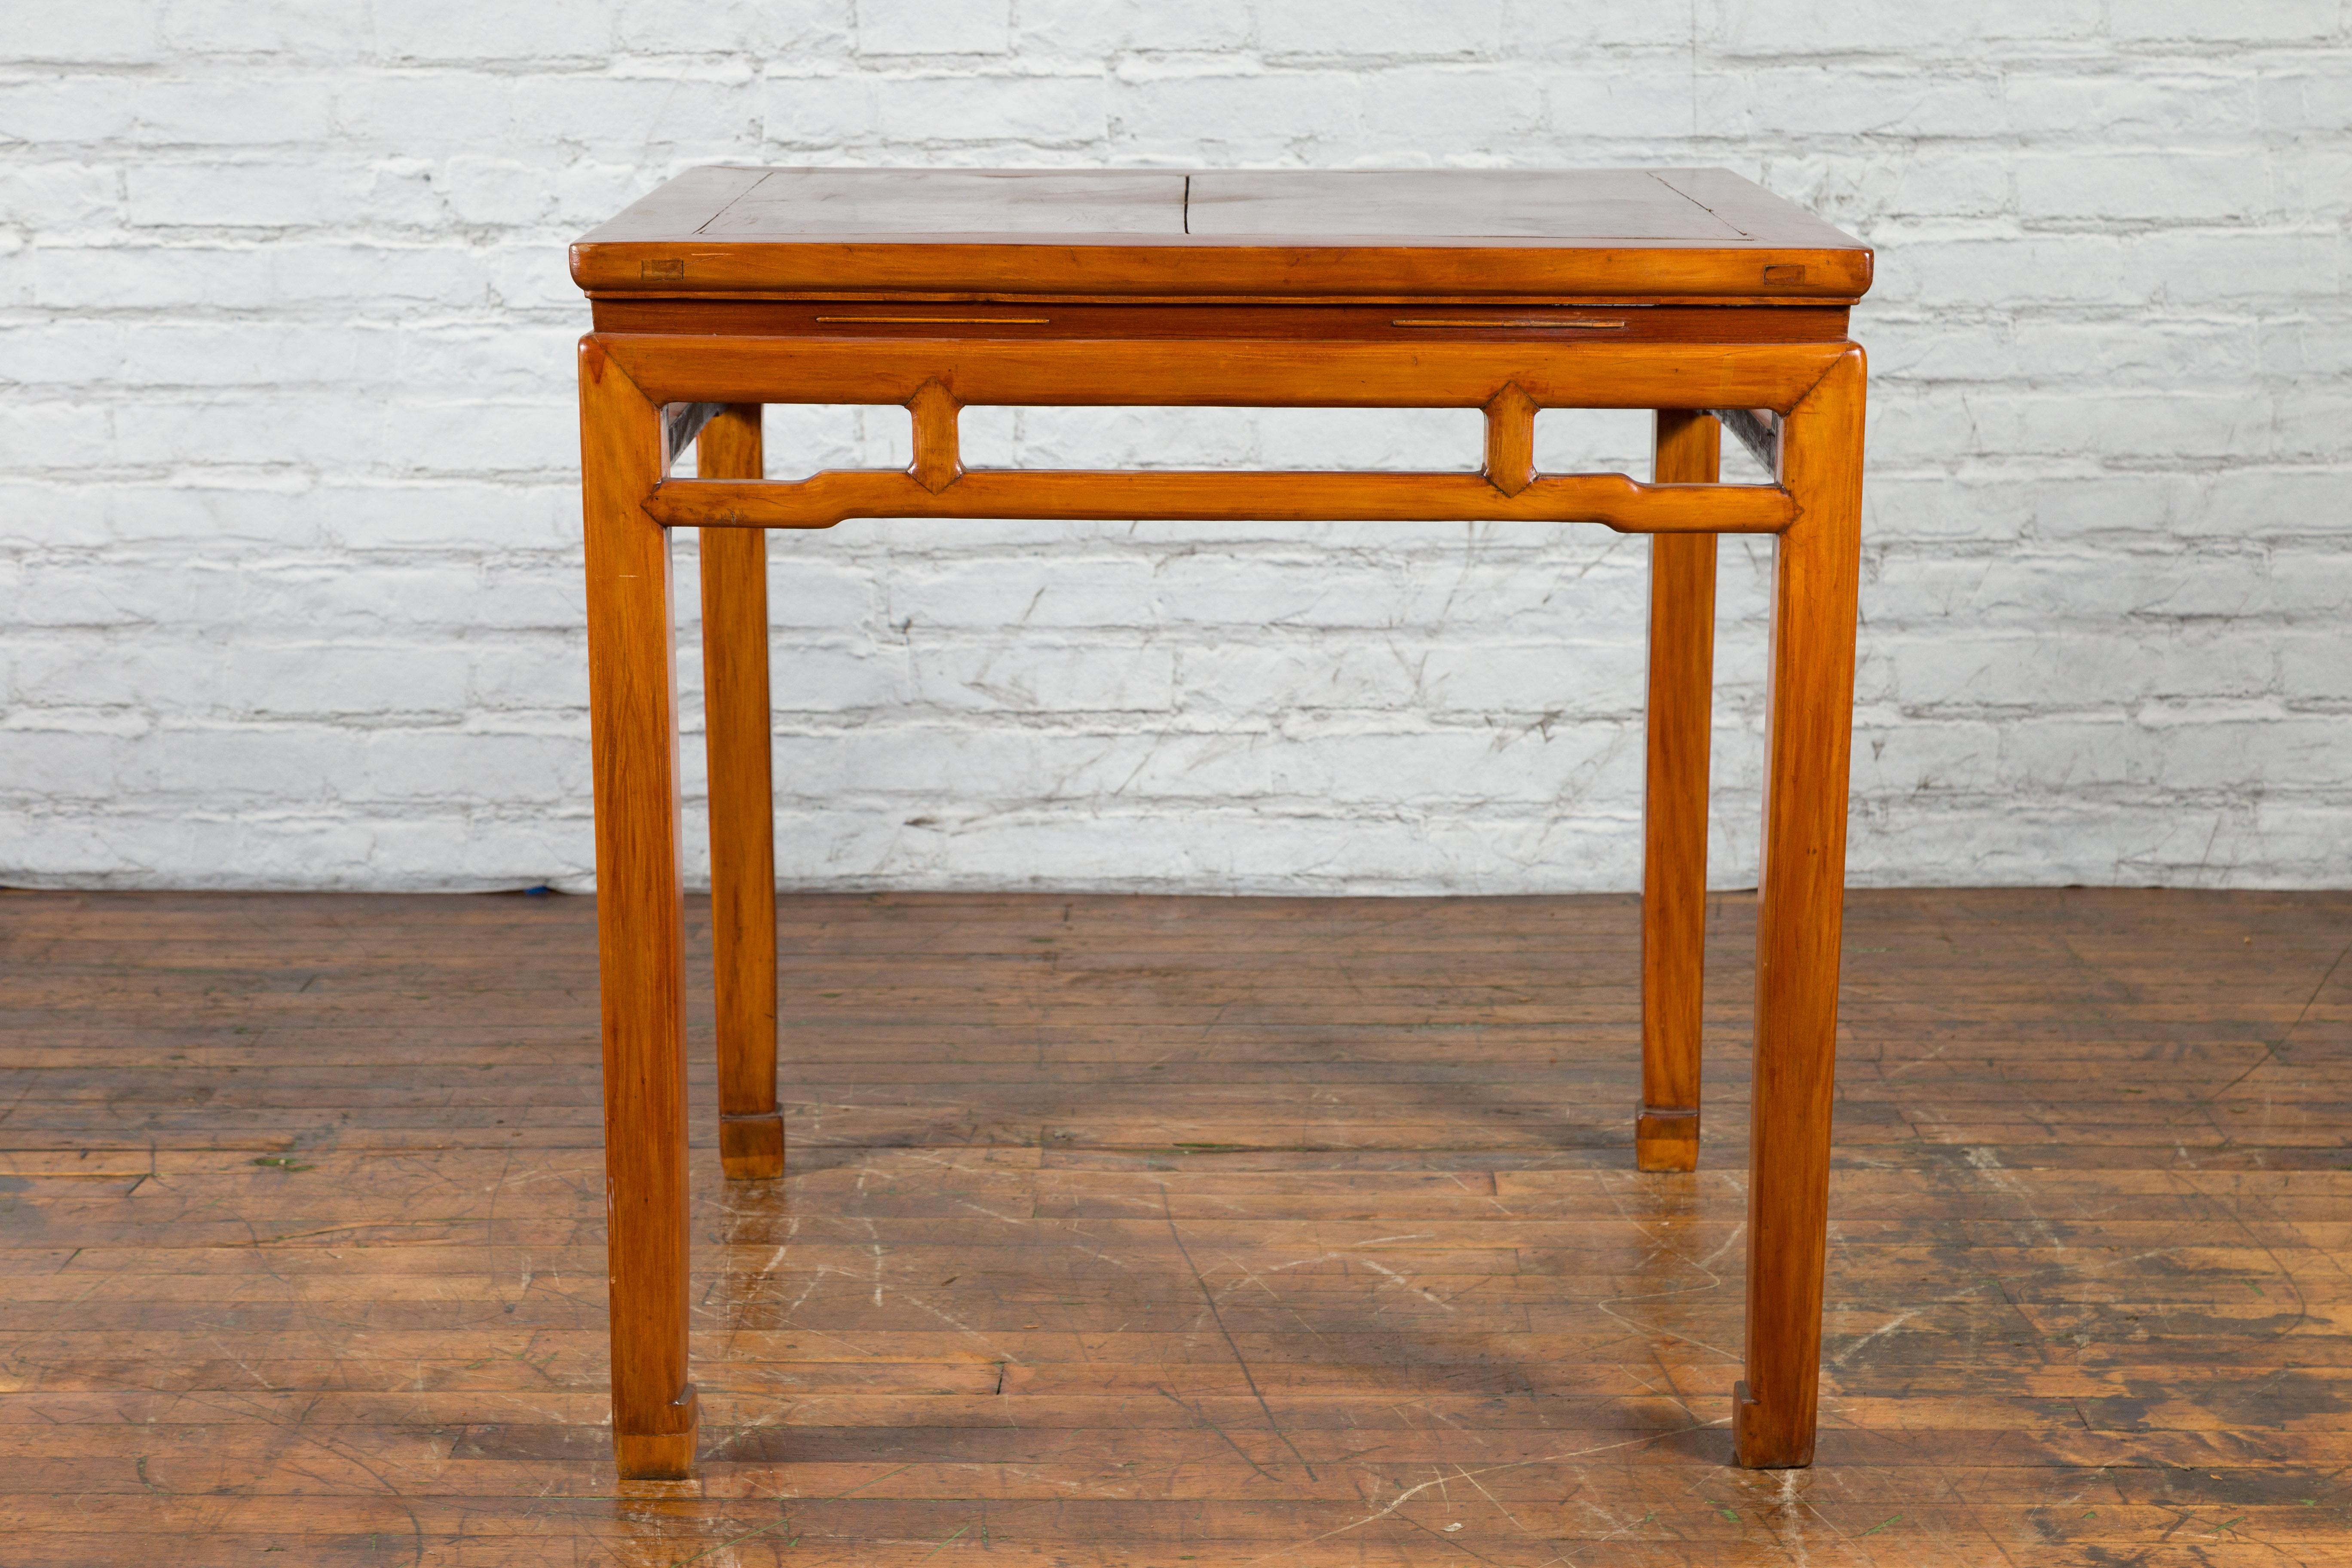 A Chinese Qing Dynasty period square shaped fruitwood table from the 19th century, with light lacquer, humpback stretchers and horse hoof legs. Created in China during the Qing Dynasty, this fruitwood table features a square planked waisted top